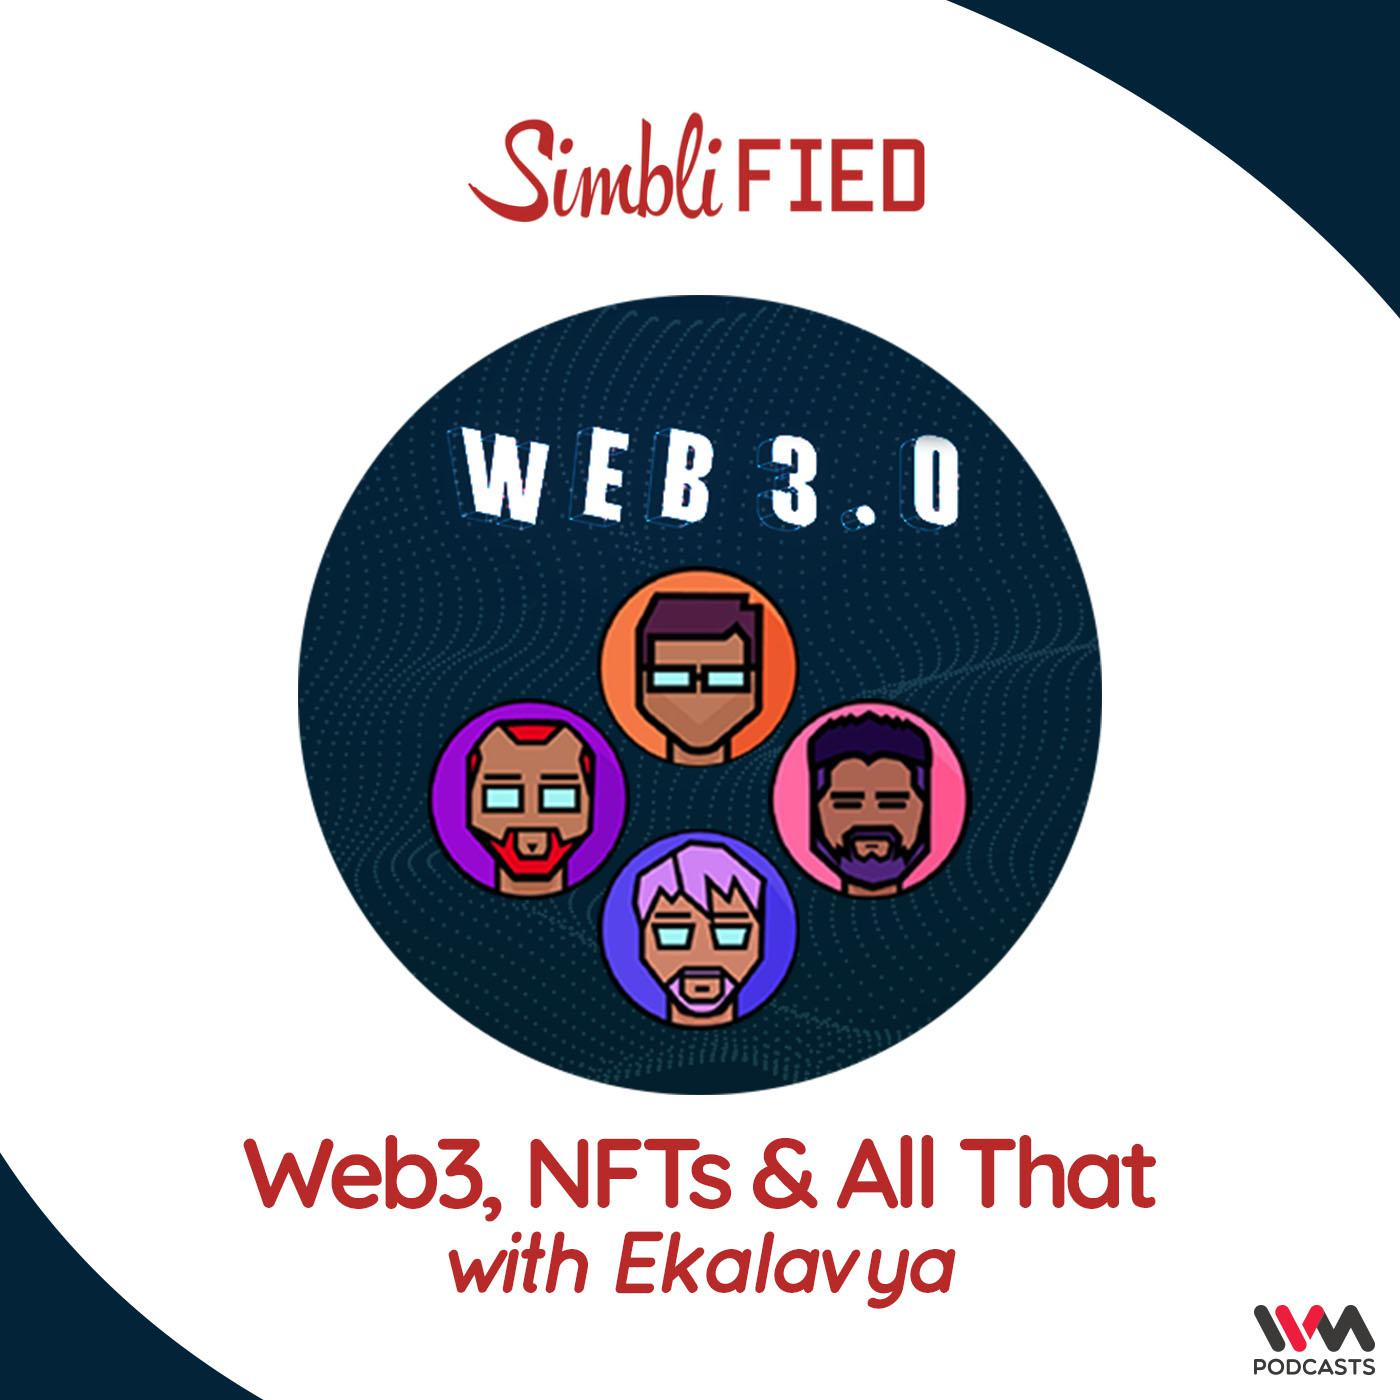 Web3, NFTs and all that: With Ekalavya